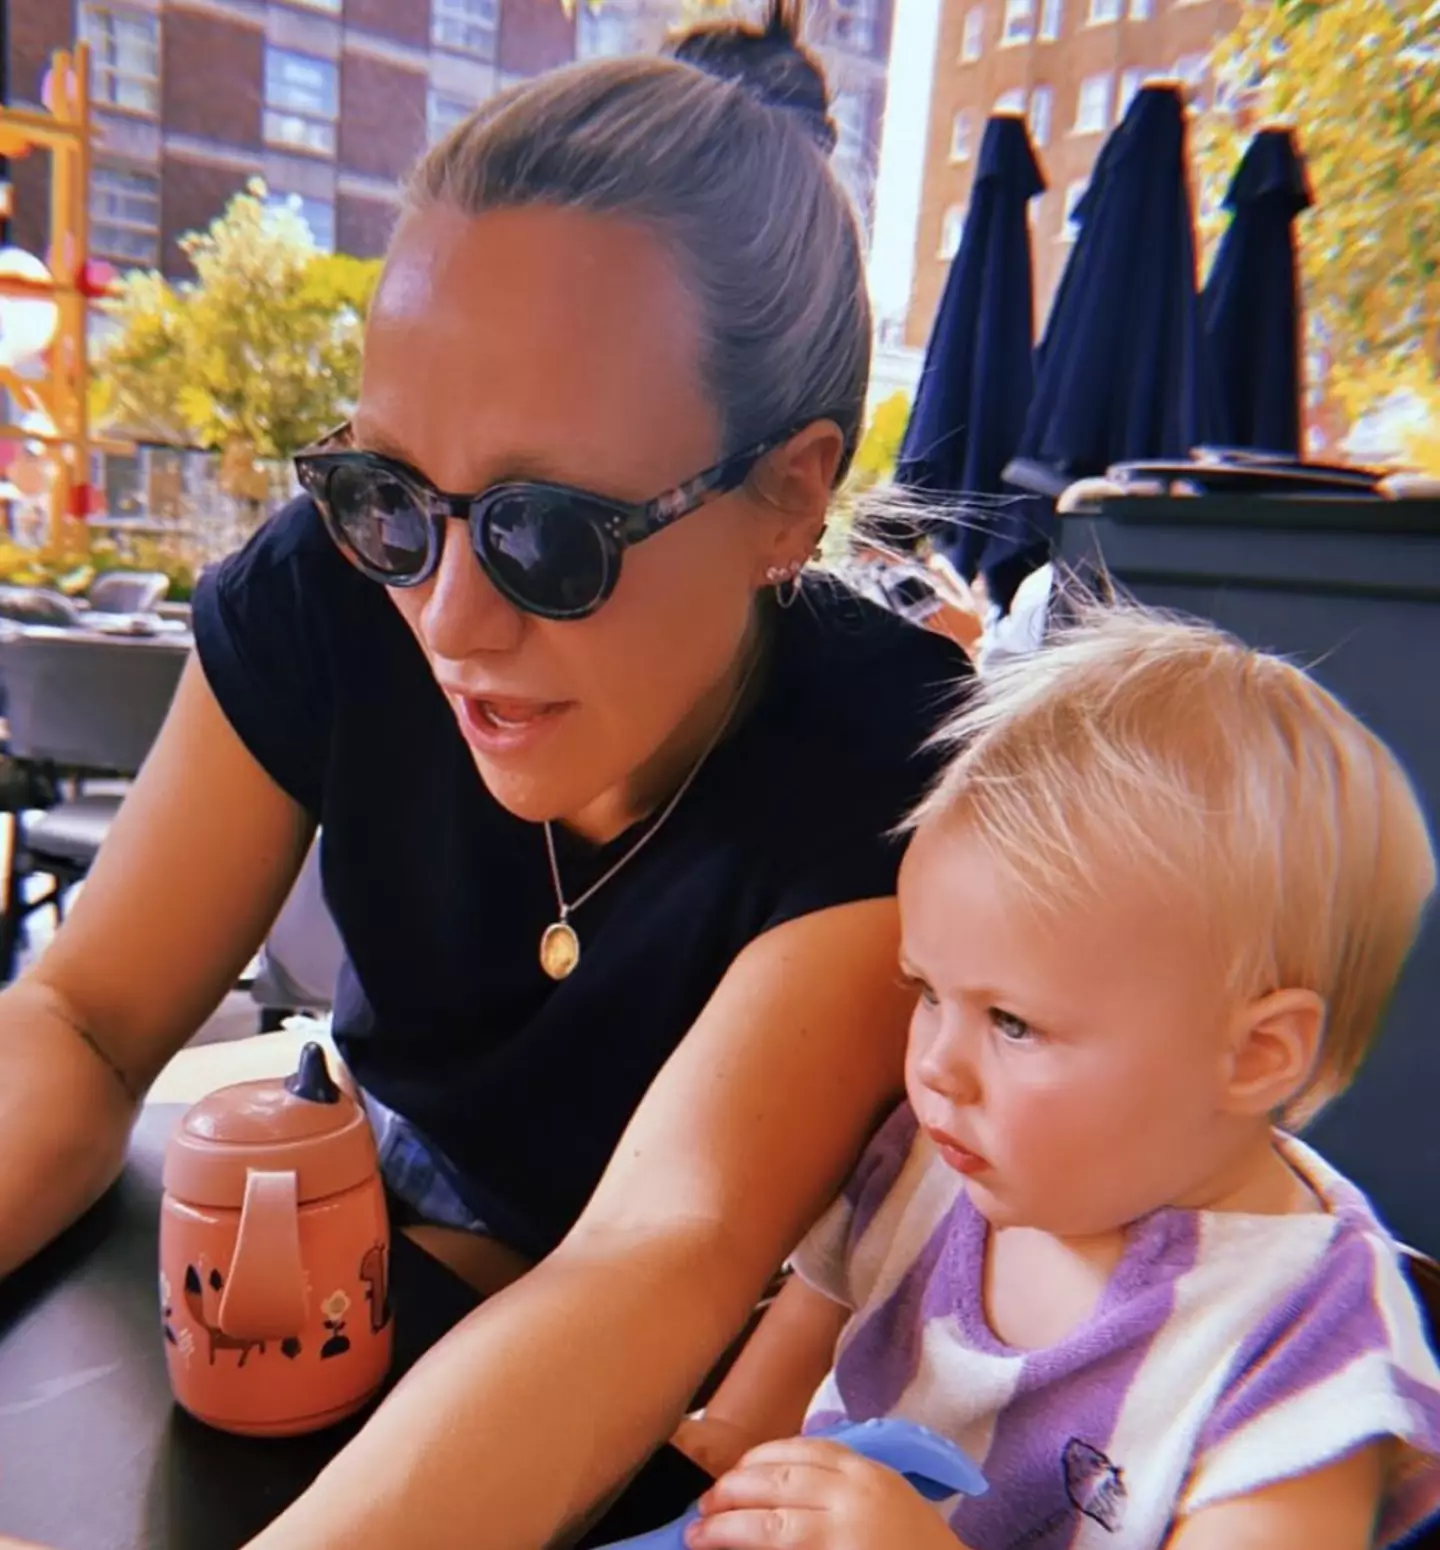 Chloe had been married to James since 2018 and the pair share one child together, 15-month-old Bodhi.